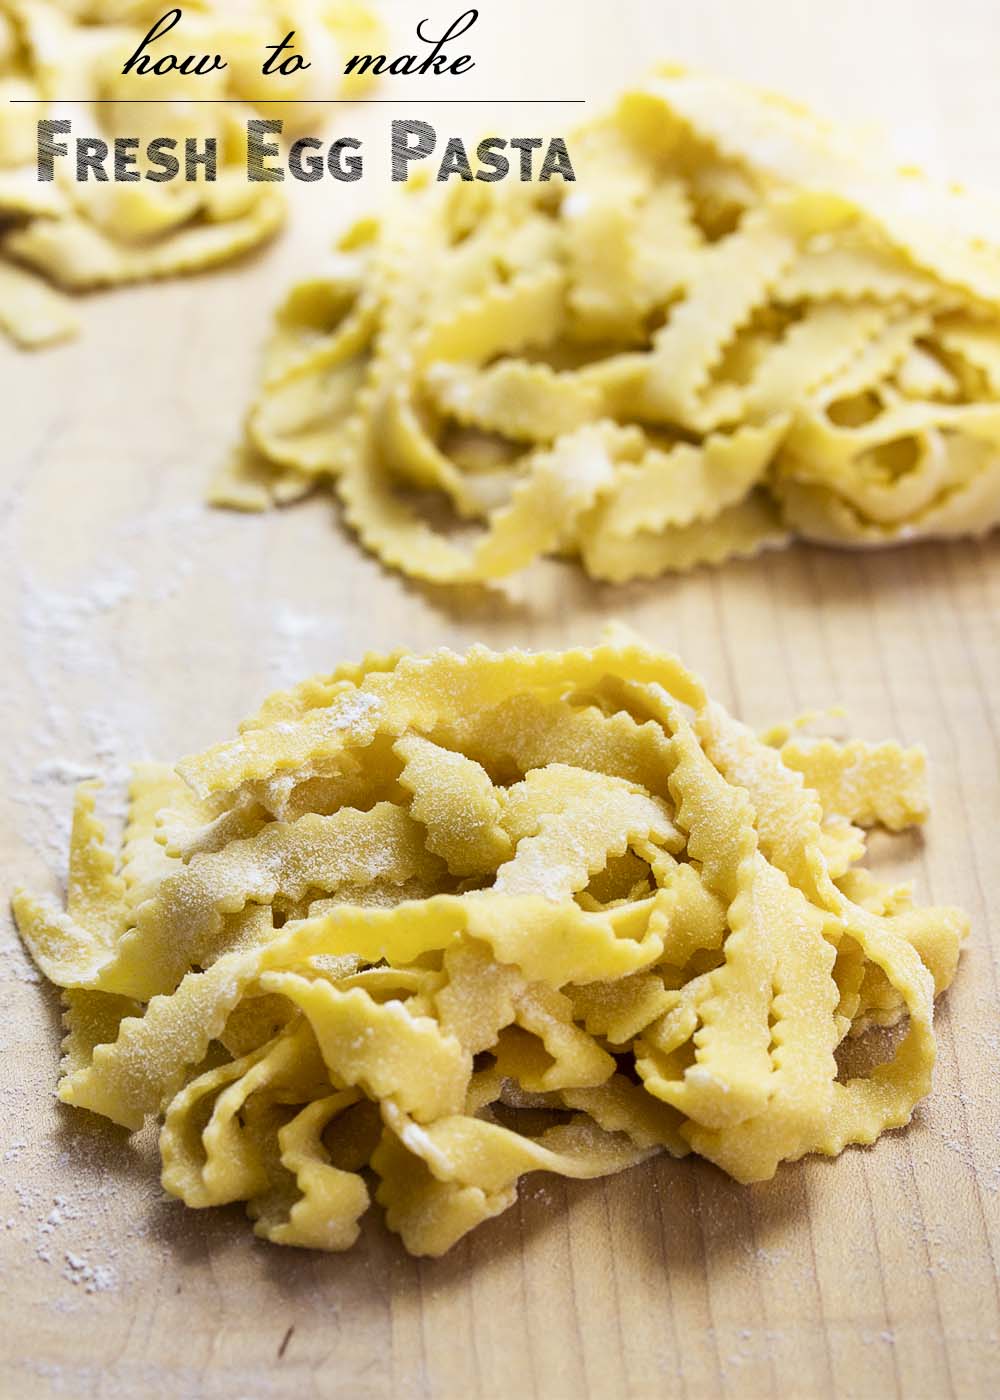 https://www.justalittlebitofbacon.com/wp-content/uploads/2017/03/how-to-make-fresh-egg-pasta-1-with-text.jpg